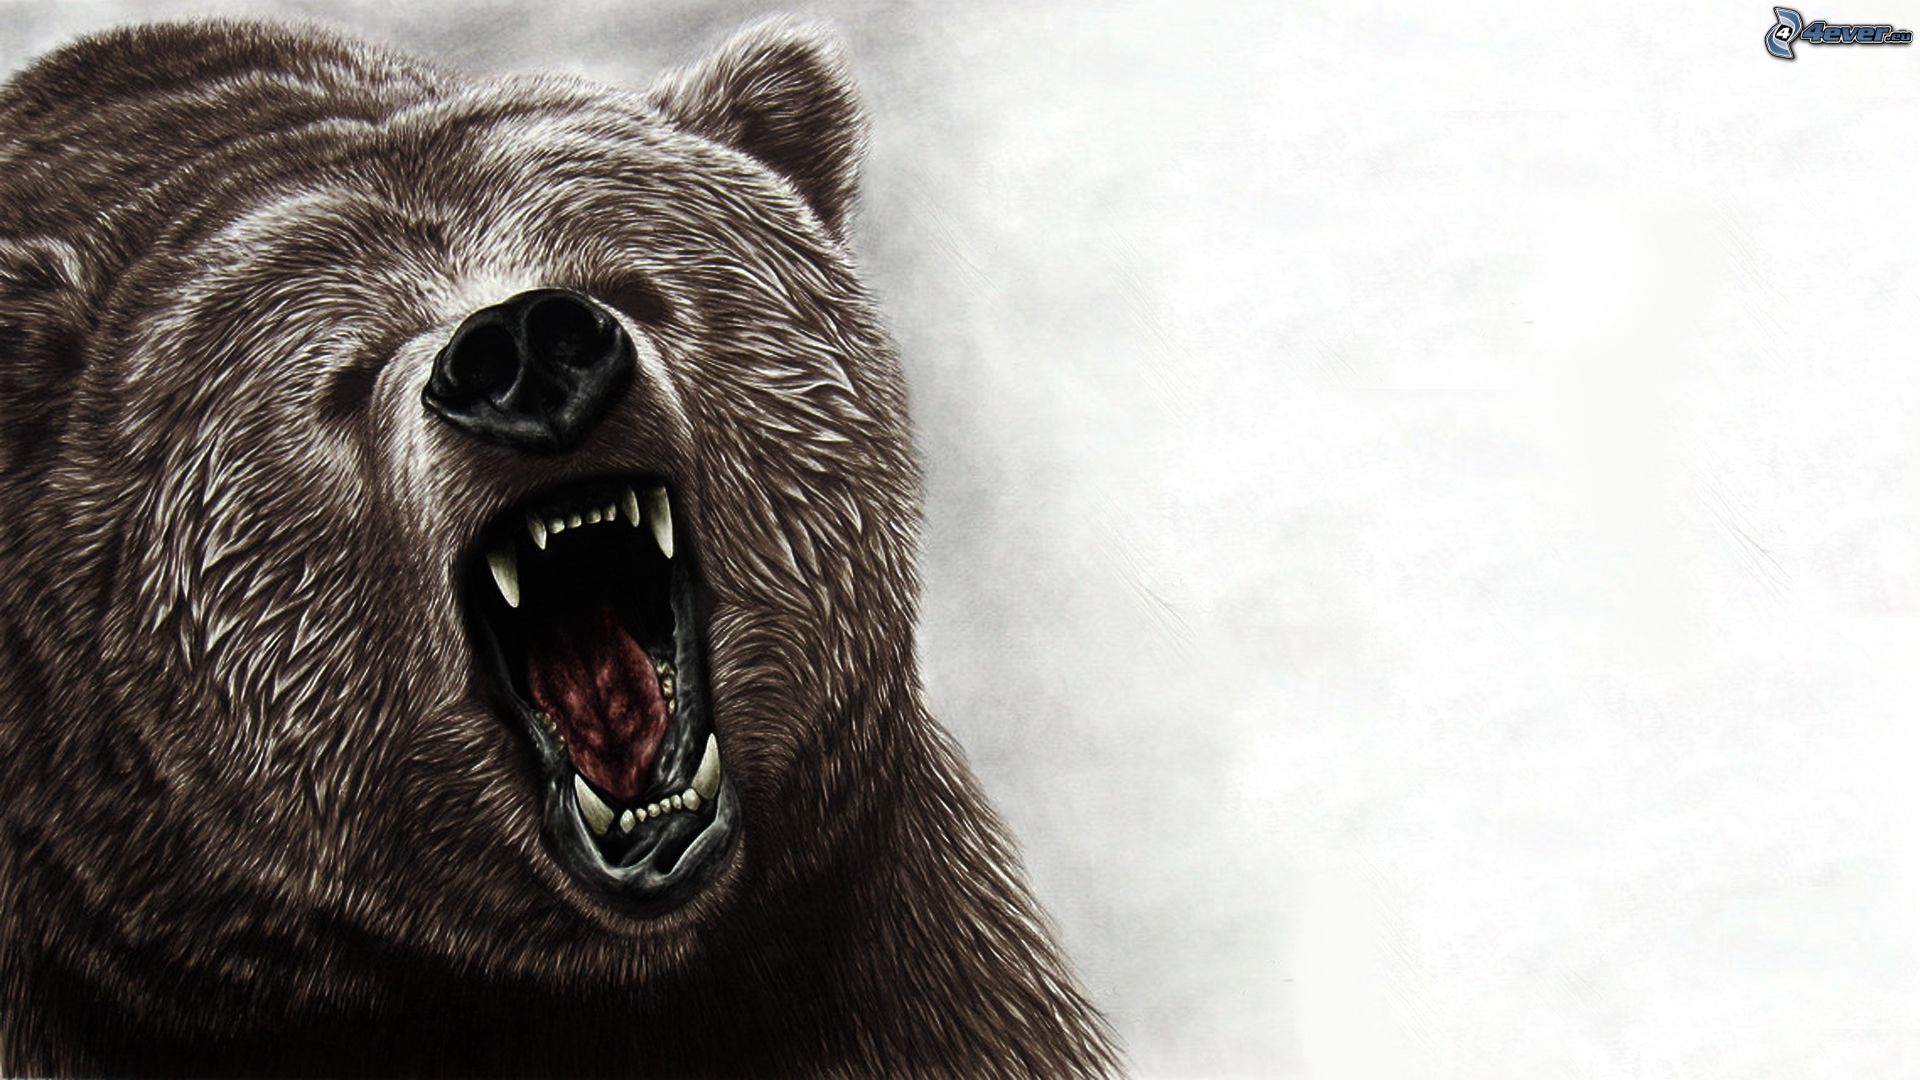 Grizzly Bear, Muzzle, Yawn 237115 - Roaring Grizzly Bear Drawing , HD Wallpaper & Backgrounds